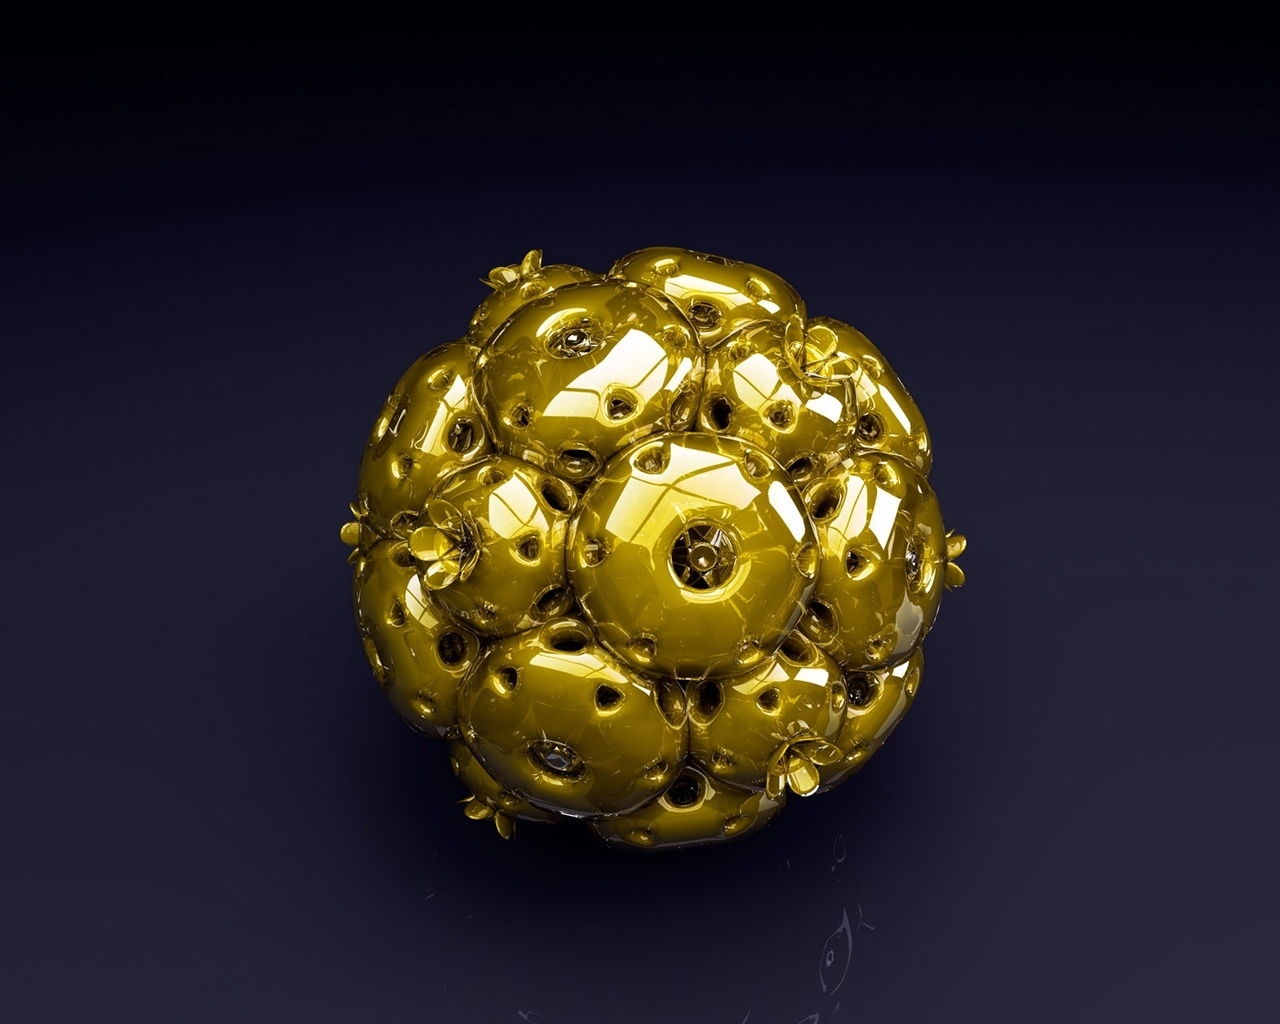 Gold Ball for 1280 x 1024 resolution